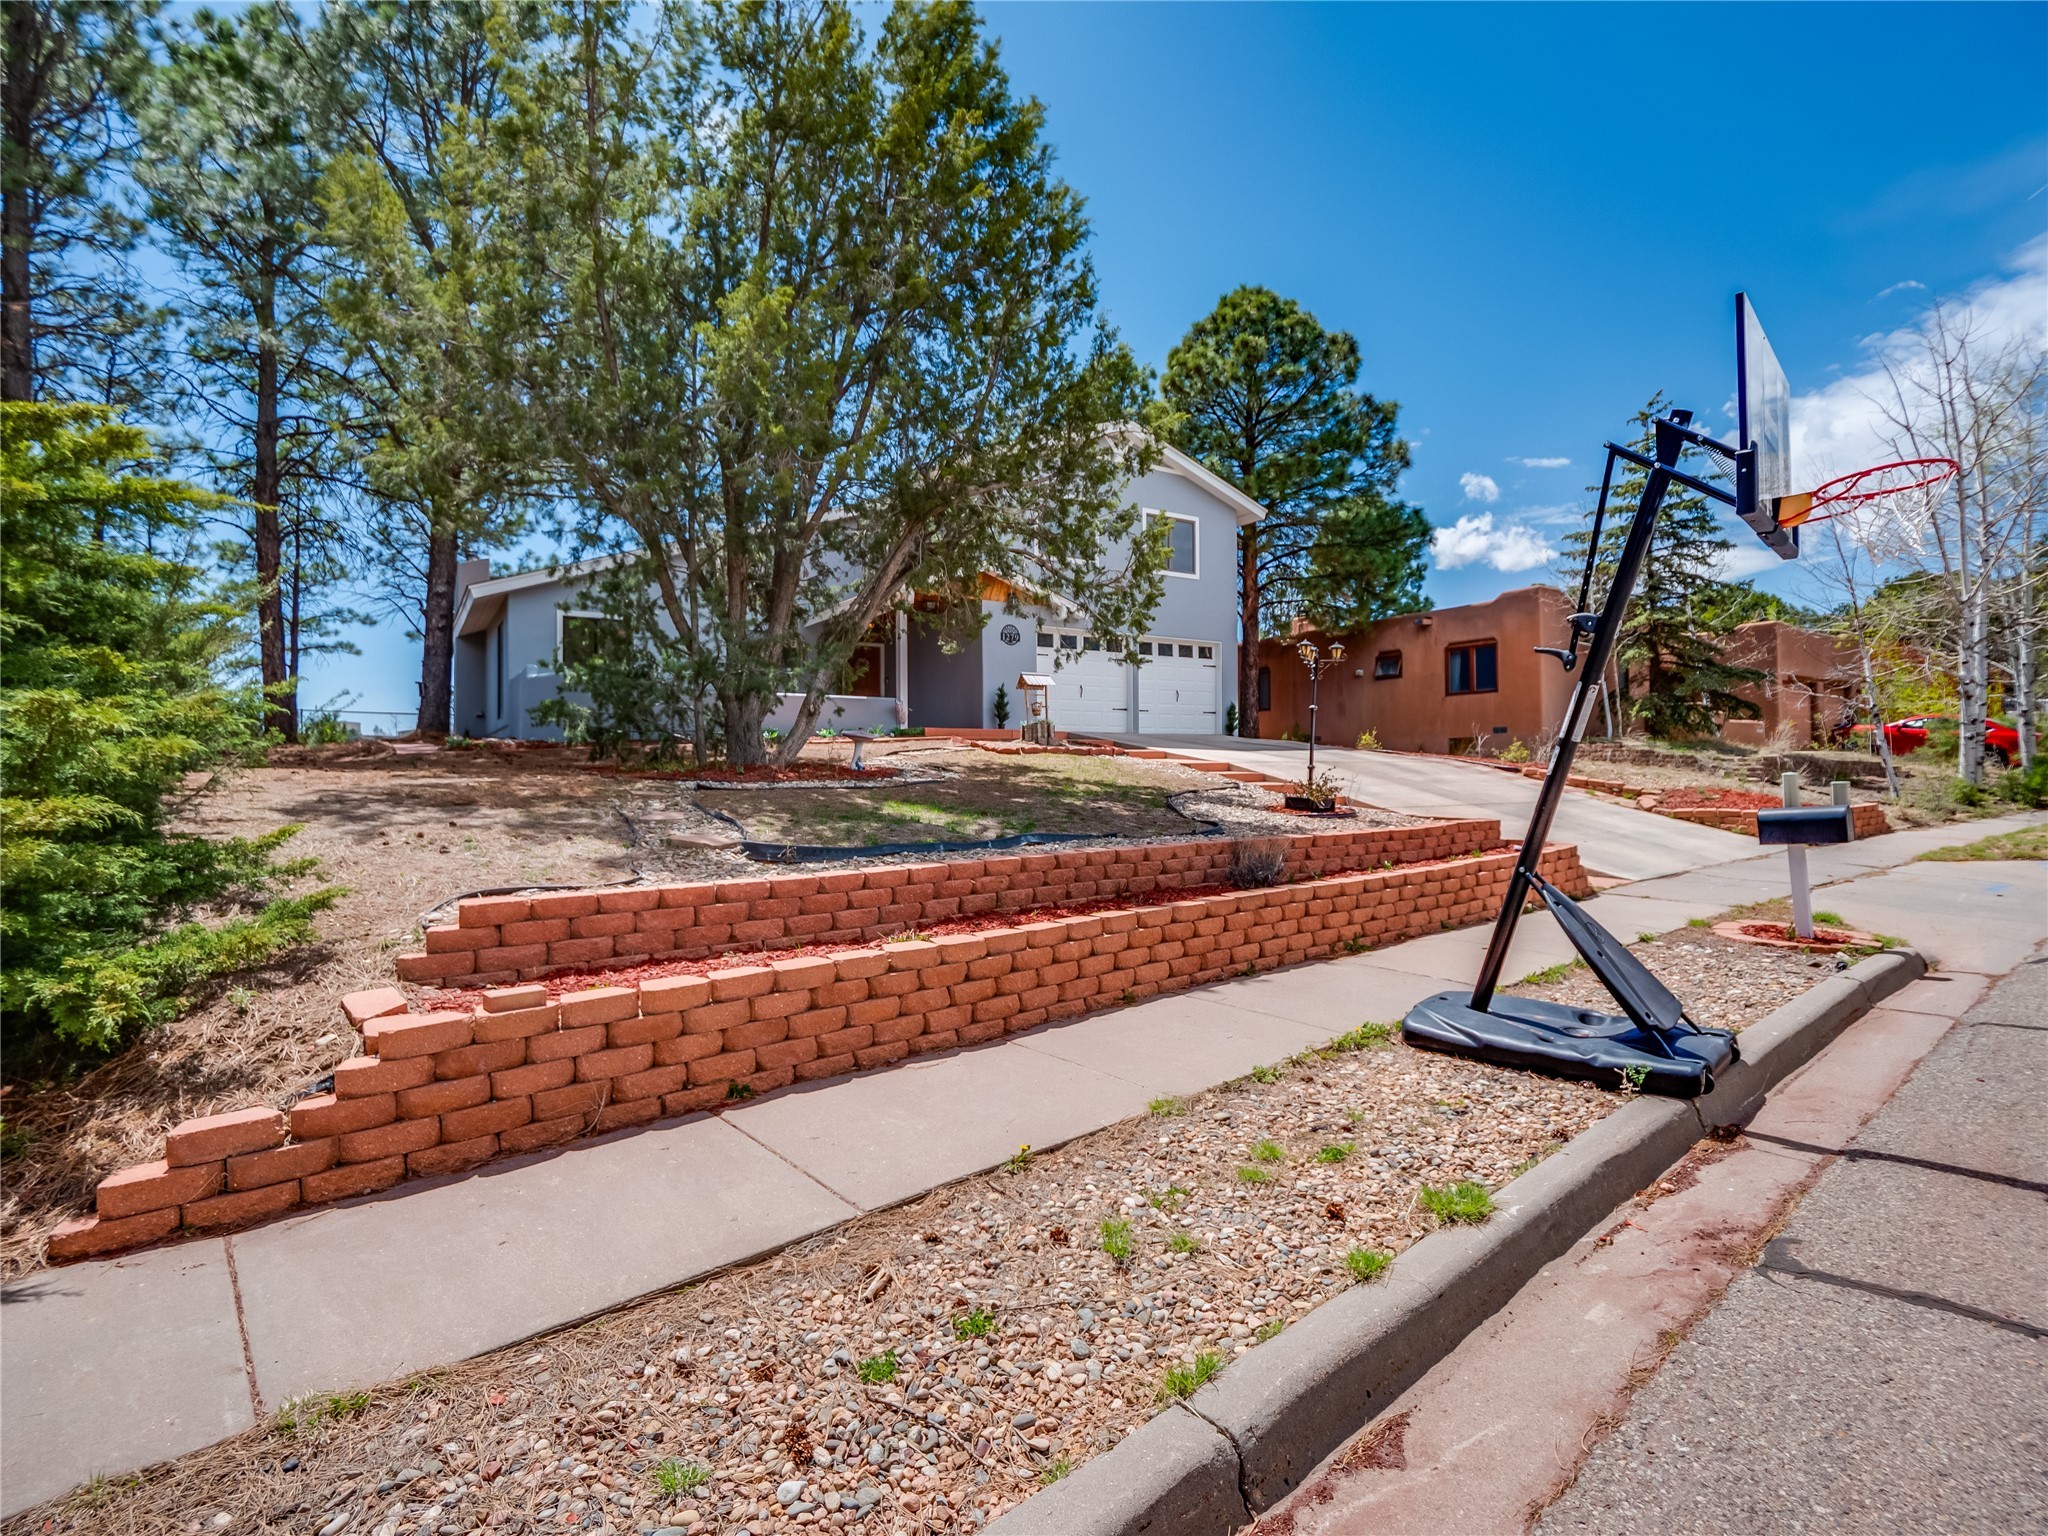 1279 San Ildefonso, Los Alamos, New Mexico 87544, 4 Bedrooms Bedrooms, ,3 BathroomsBathrooms,Residential,For Sale,1279 San Ildefonso,202401469